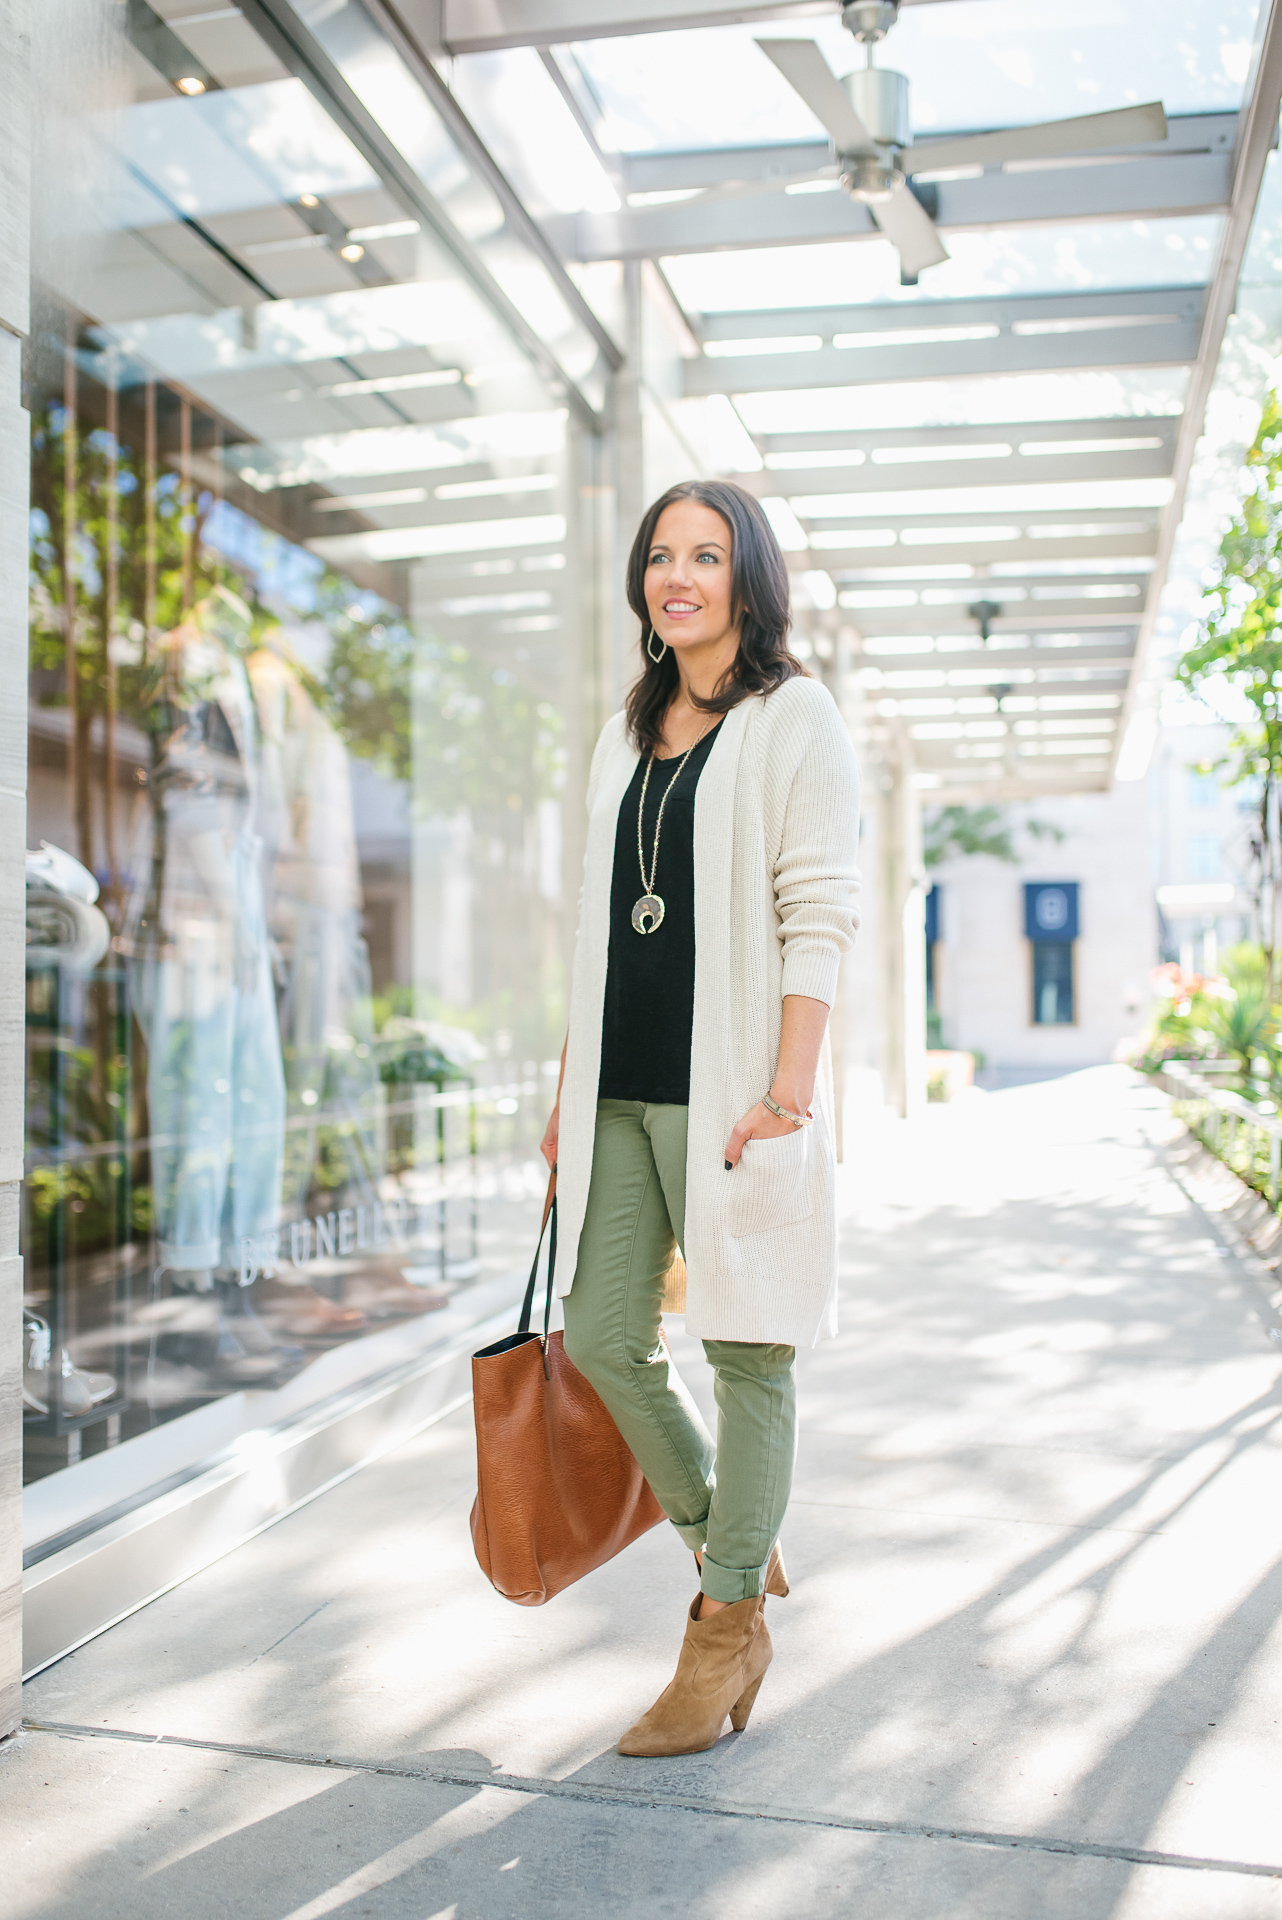 How to Wear Olive Pants in Fall, Lady in Violet